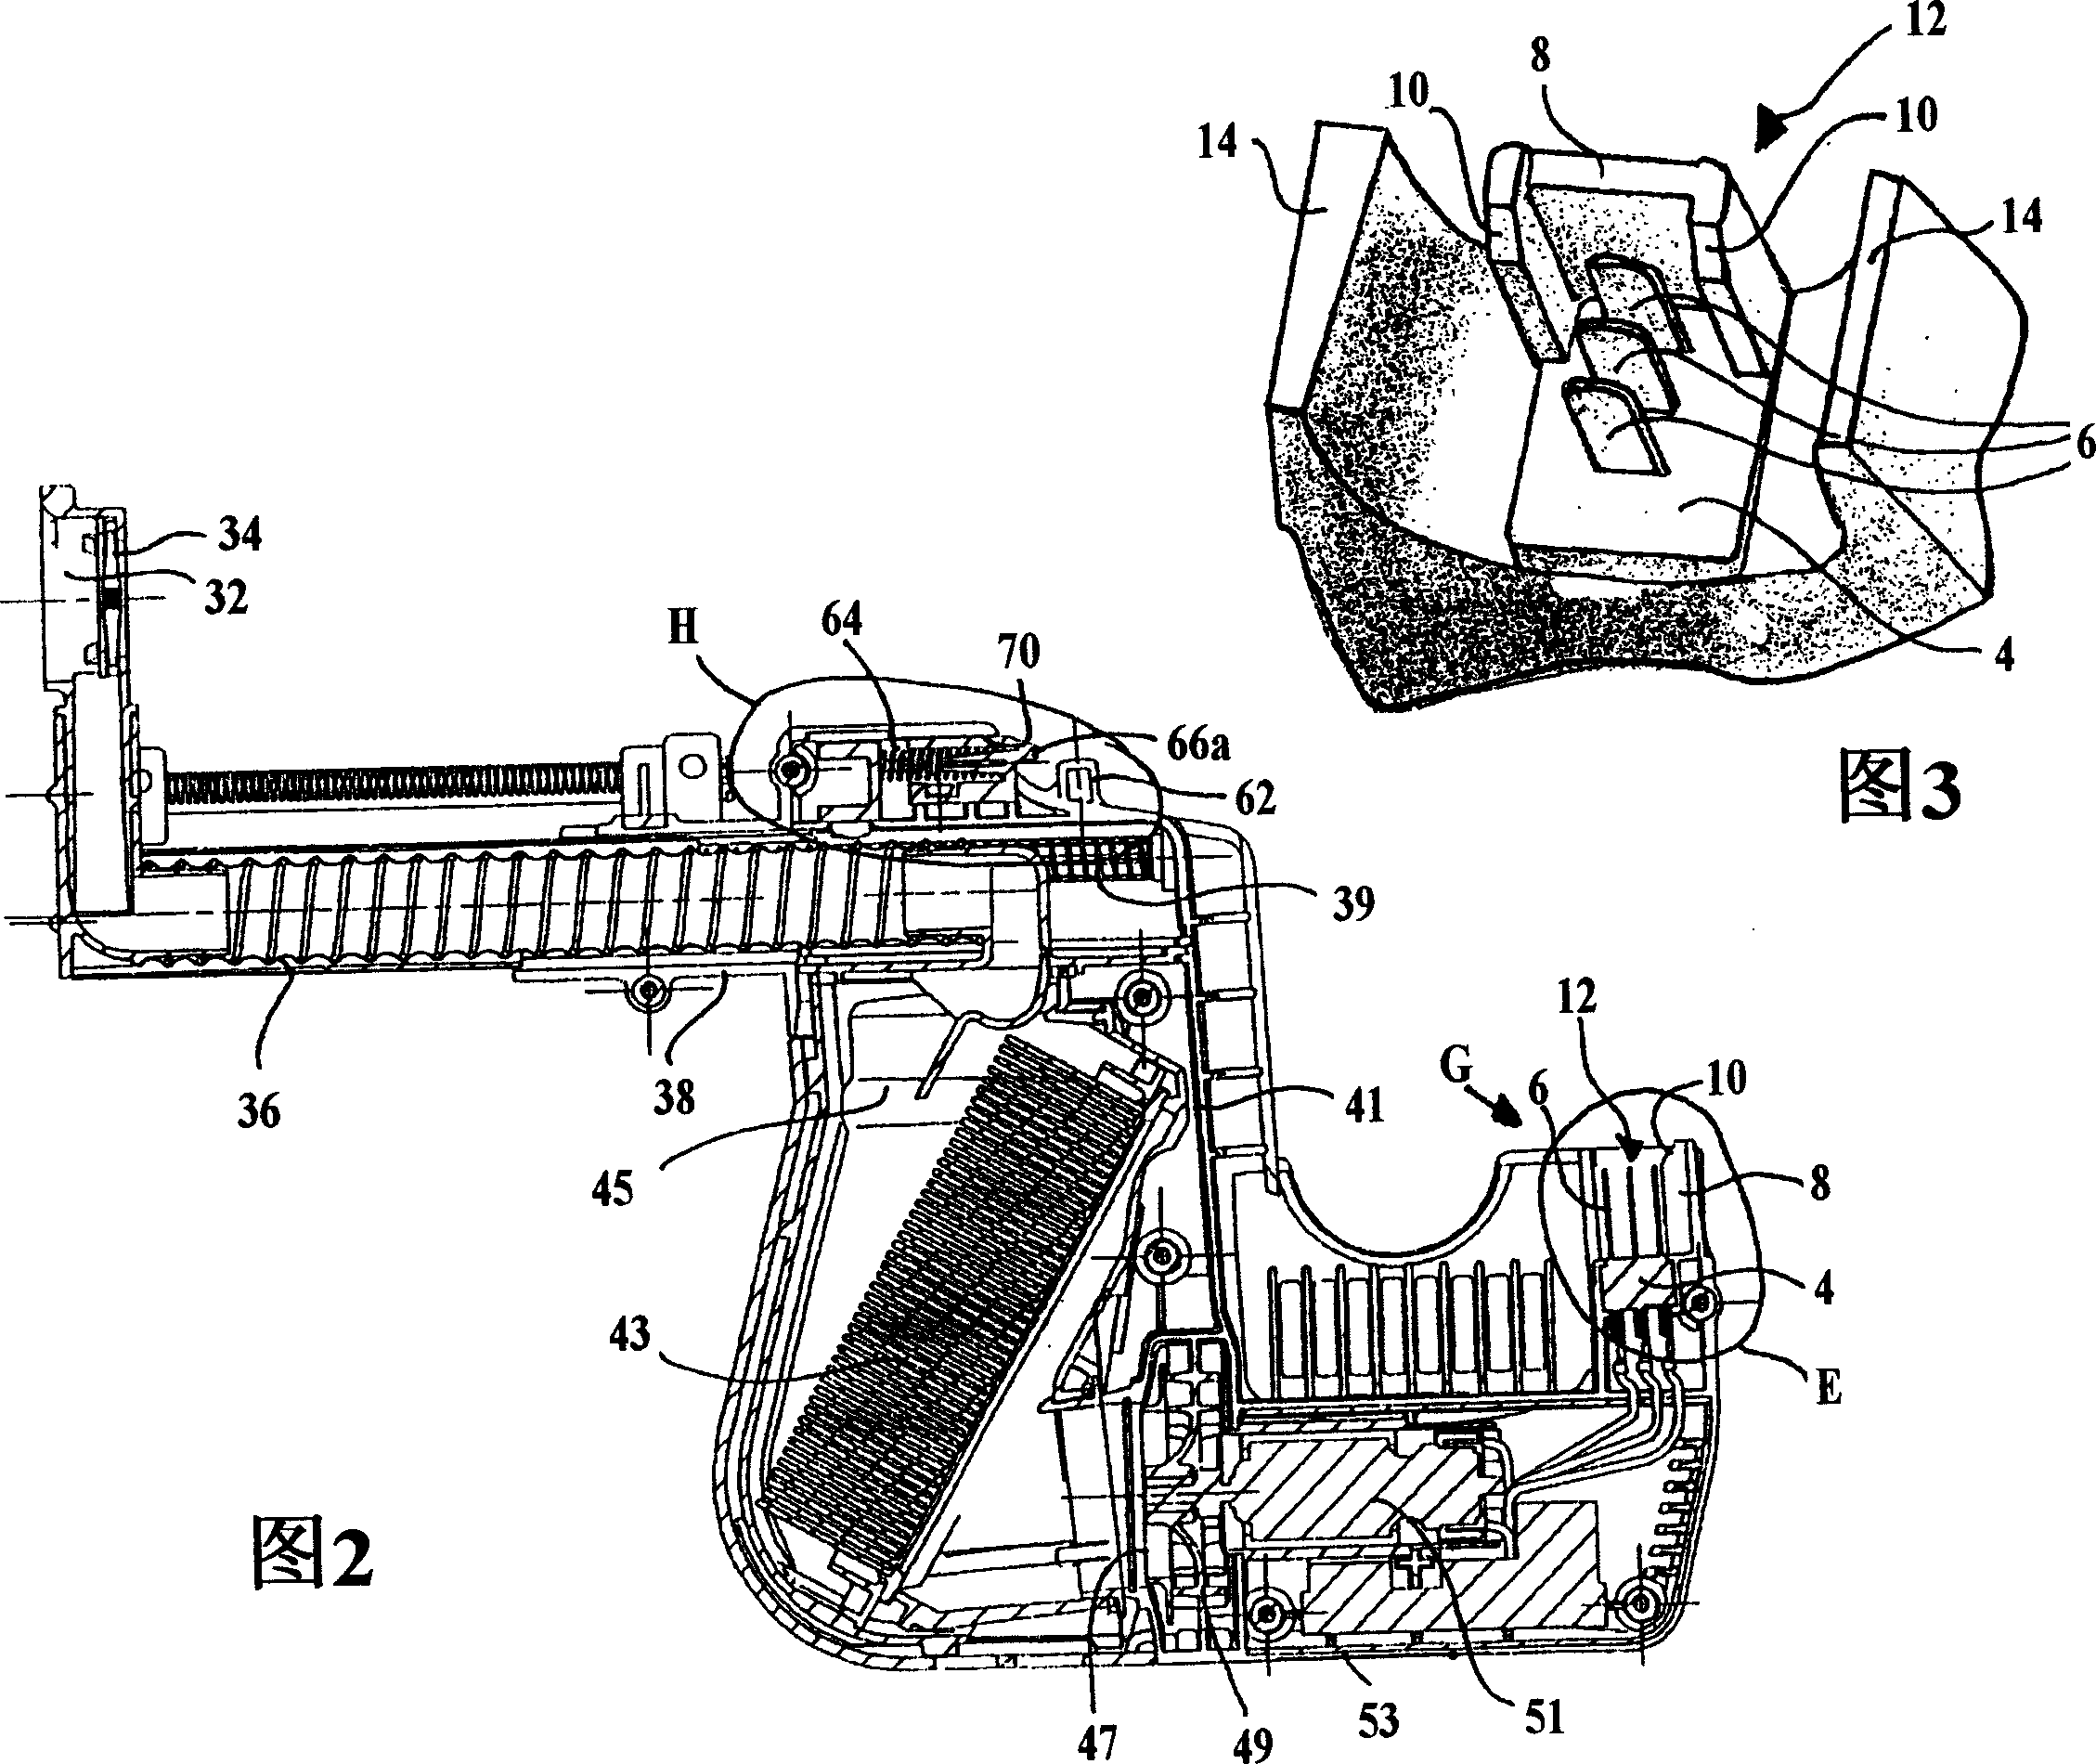 Hand-held drilling and/or hammering device with dust collecting element